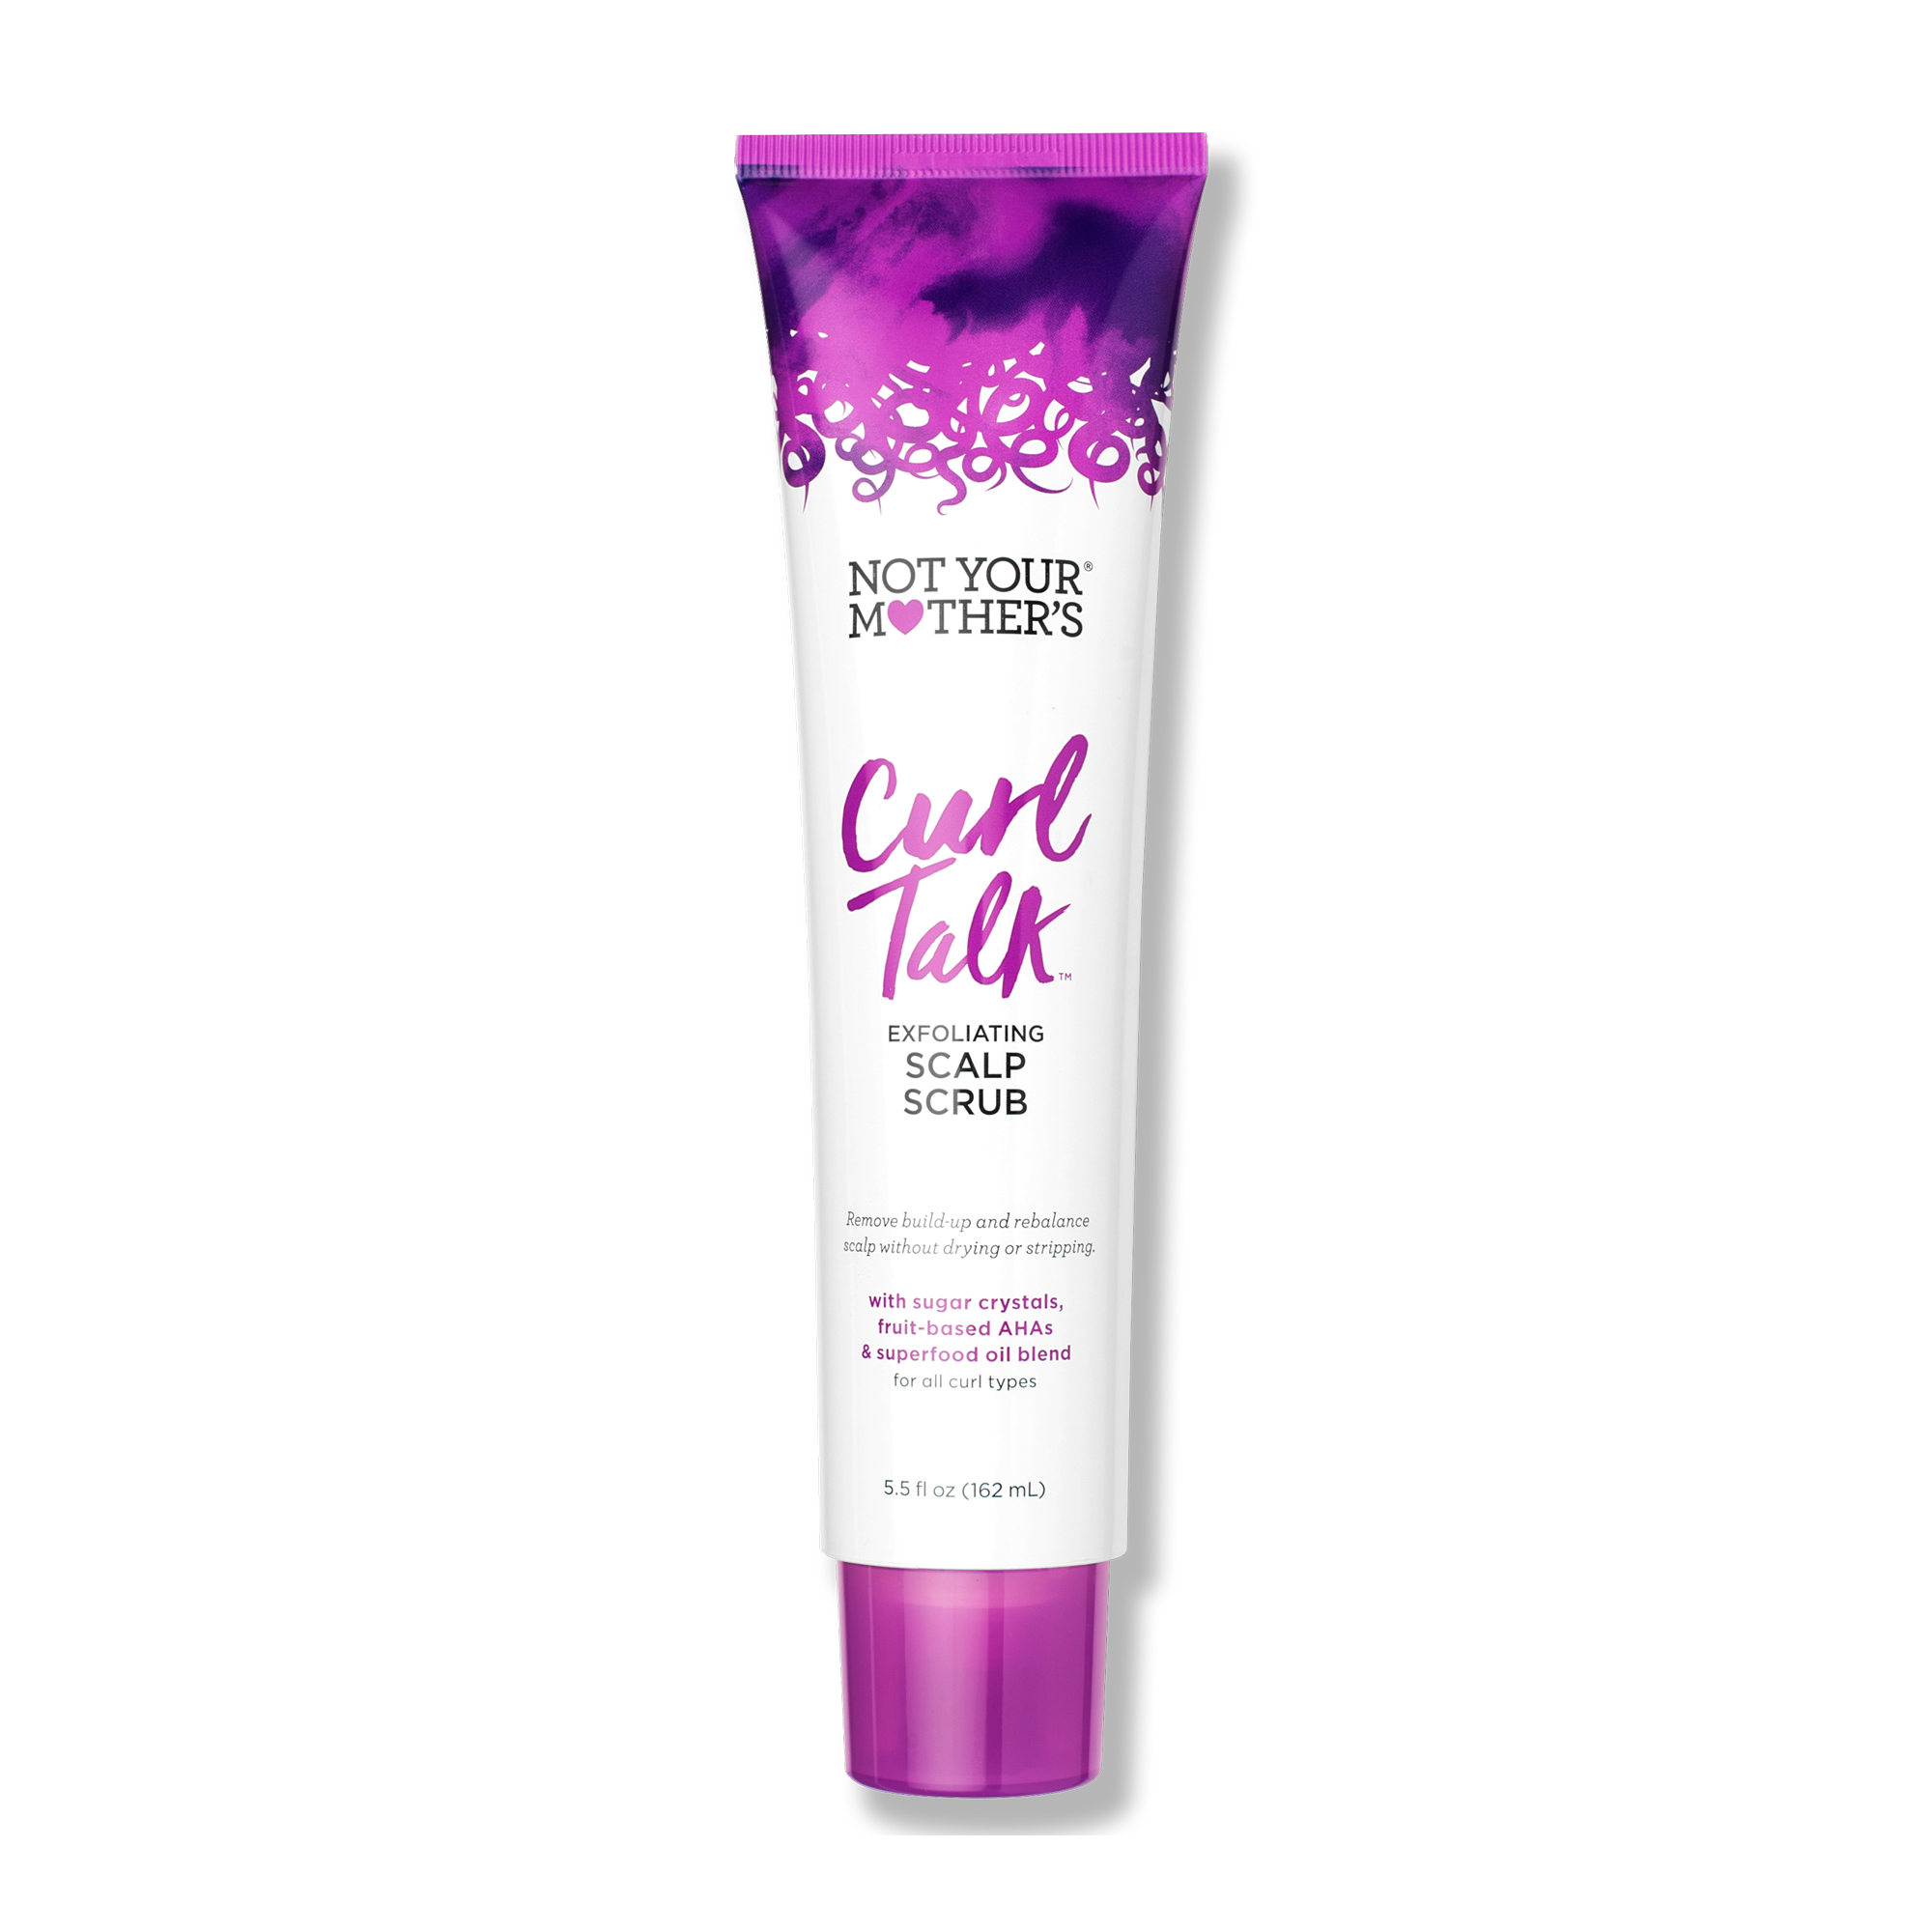 Not Your Mother's Curl Talk Exfoliating Scalp Scrub, 5 oz - image 1 of 9